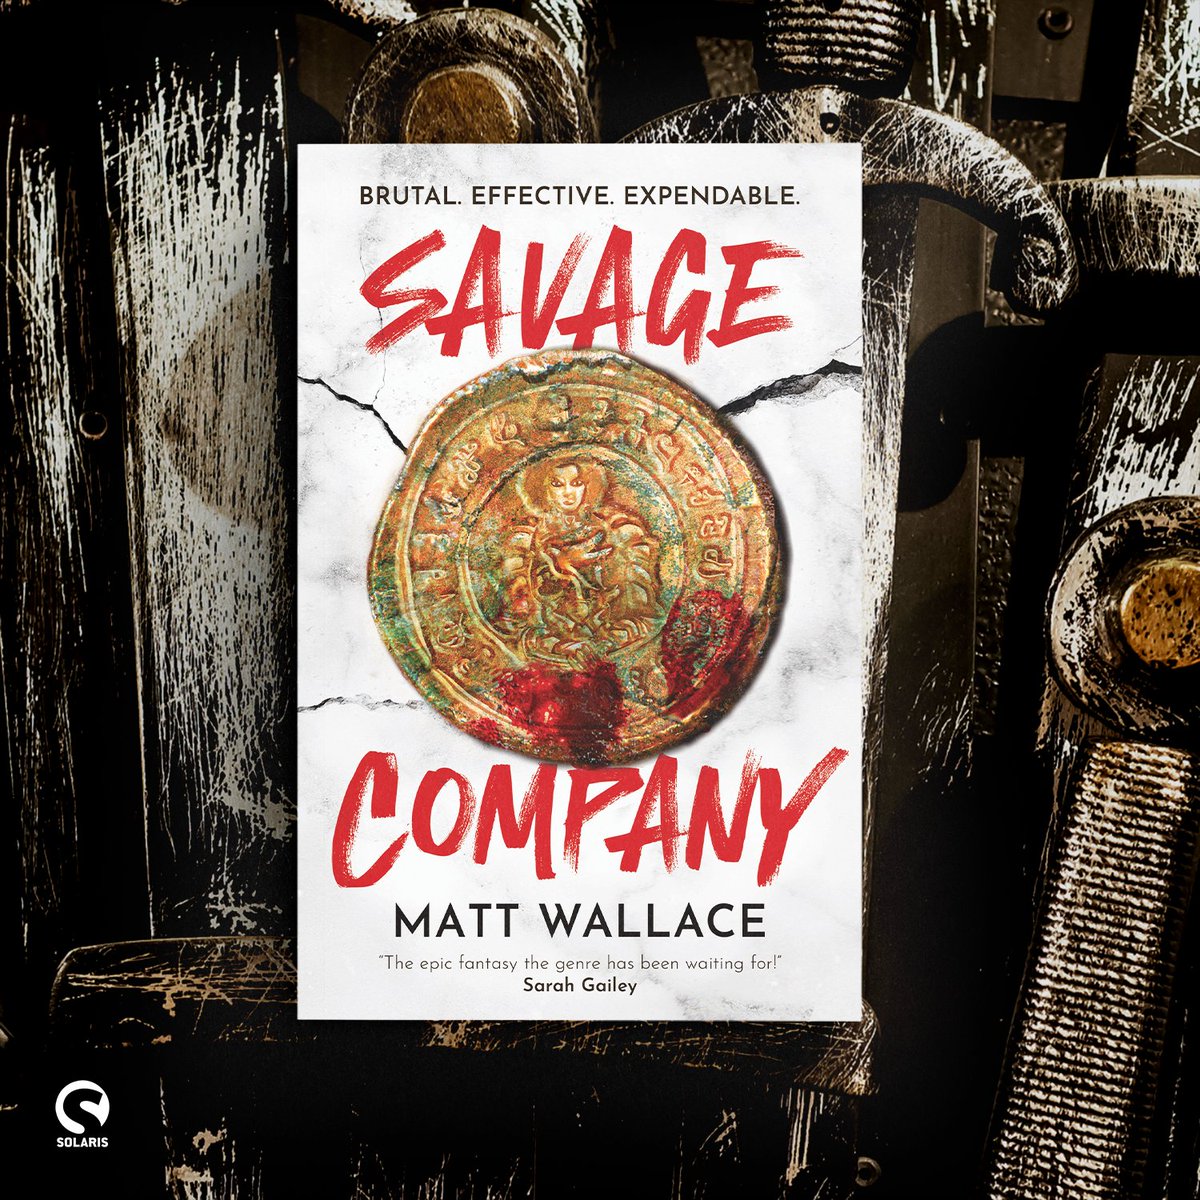 🎂 🎉 SAVAGE COMPANY by Matt Wallace has been out in the UK for three weeks today! The first book in an epic fantasy trilogy by Hugo Award-winner @MattFnWallace about a utopian city with a dark secret and the underdogs who will expose it, or die trying. geni.us/savagecompany